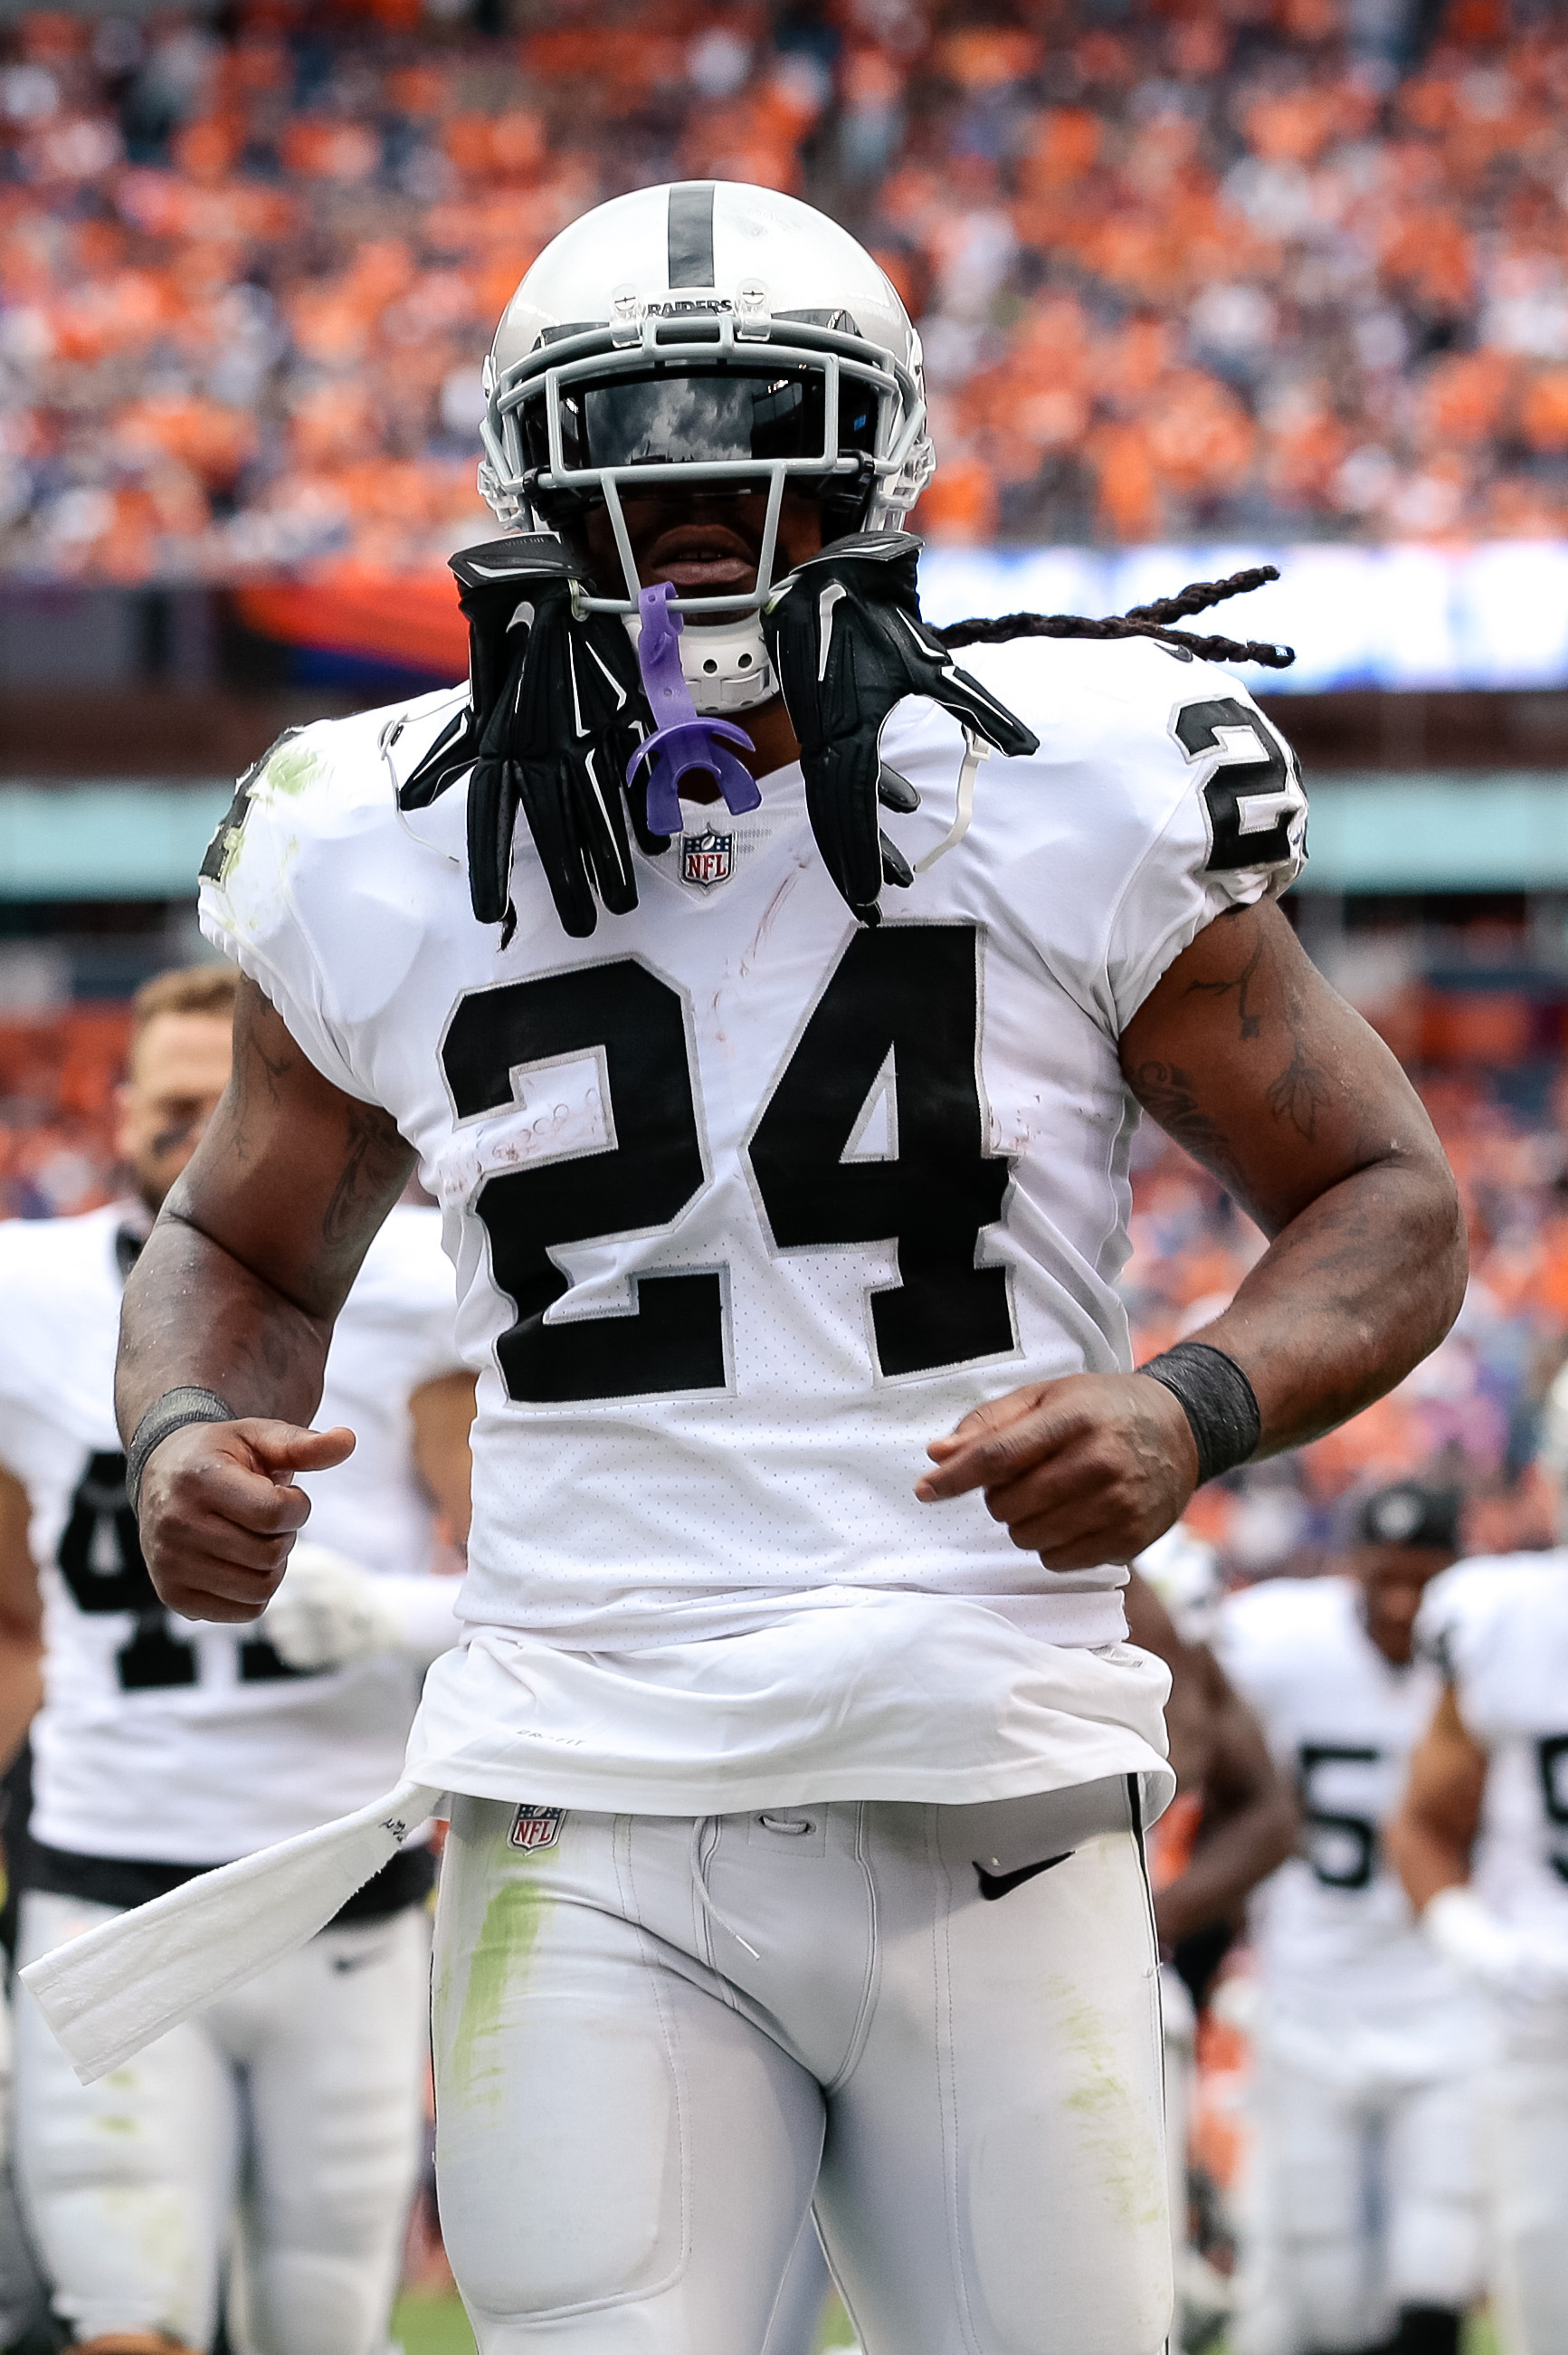 Marshawn Lynch, Bucs Discussed Deal